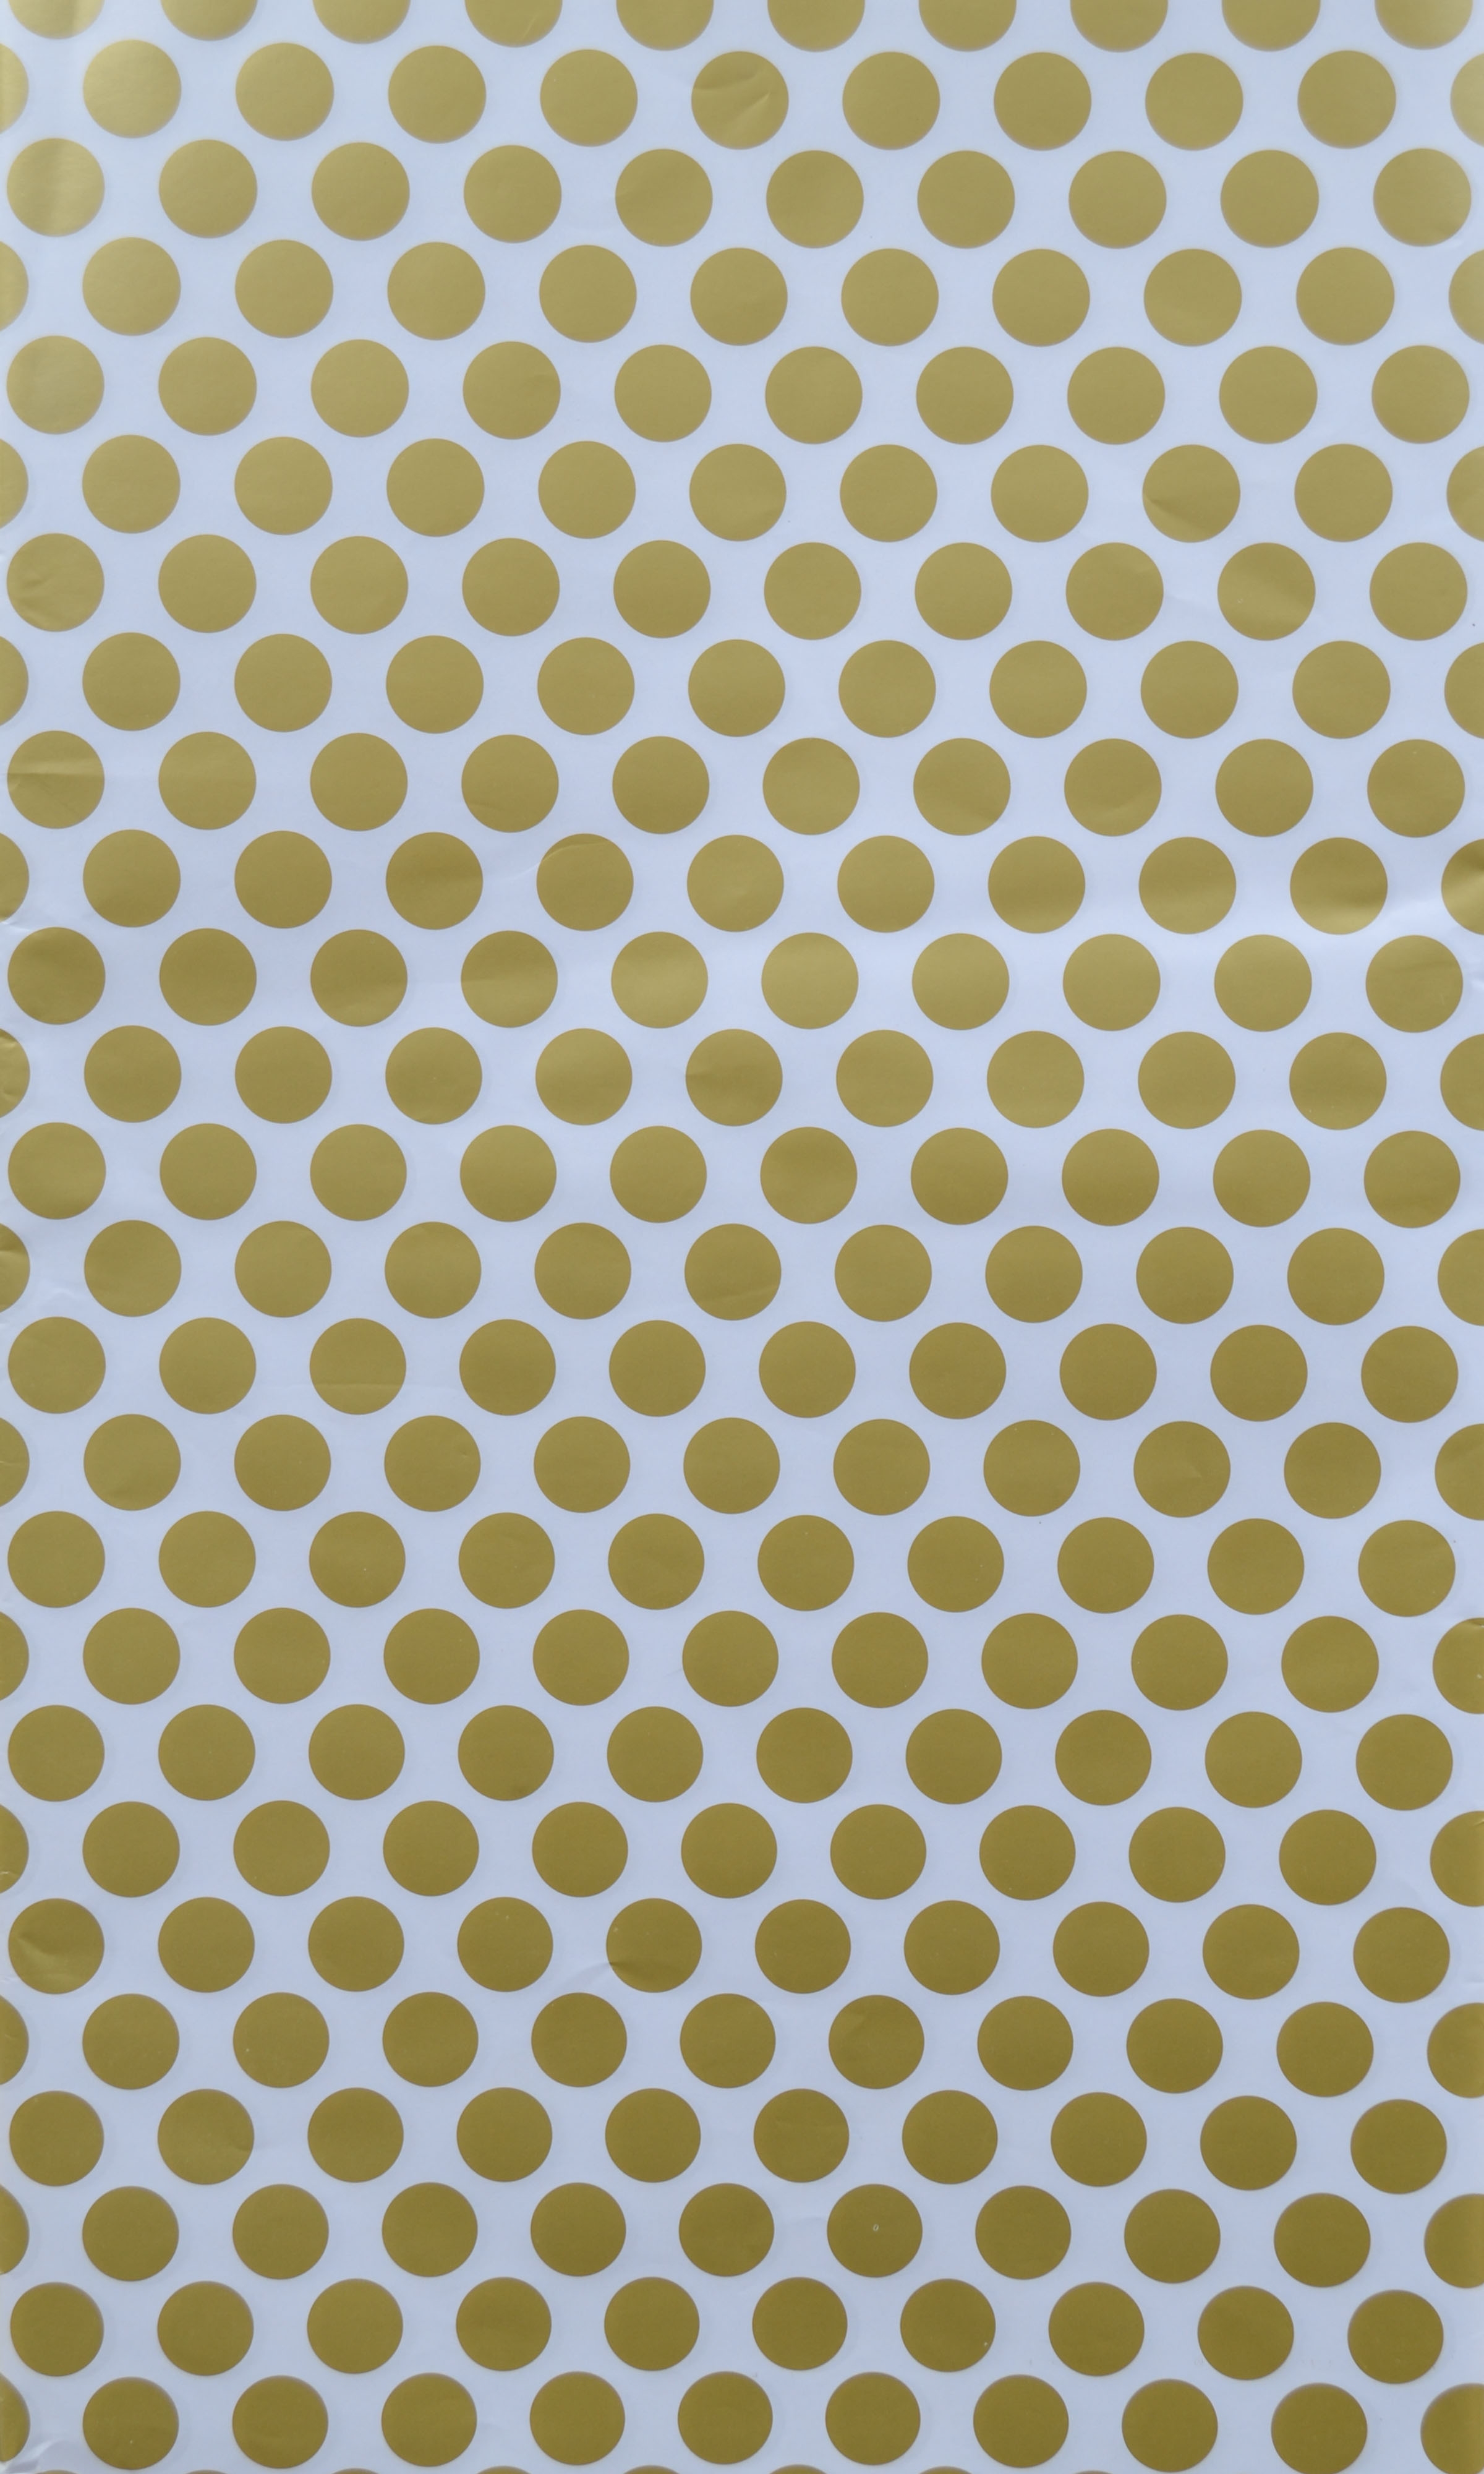 Gift wrapping Paper (Polka Dots Design in Gold)